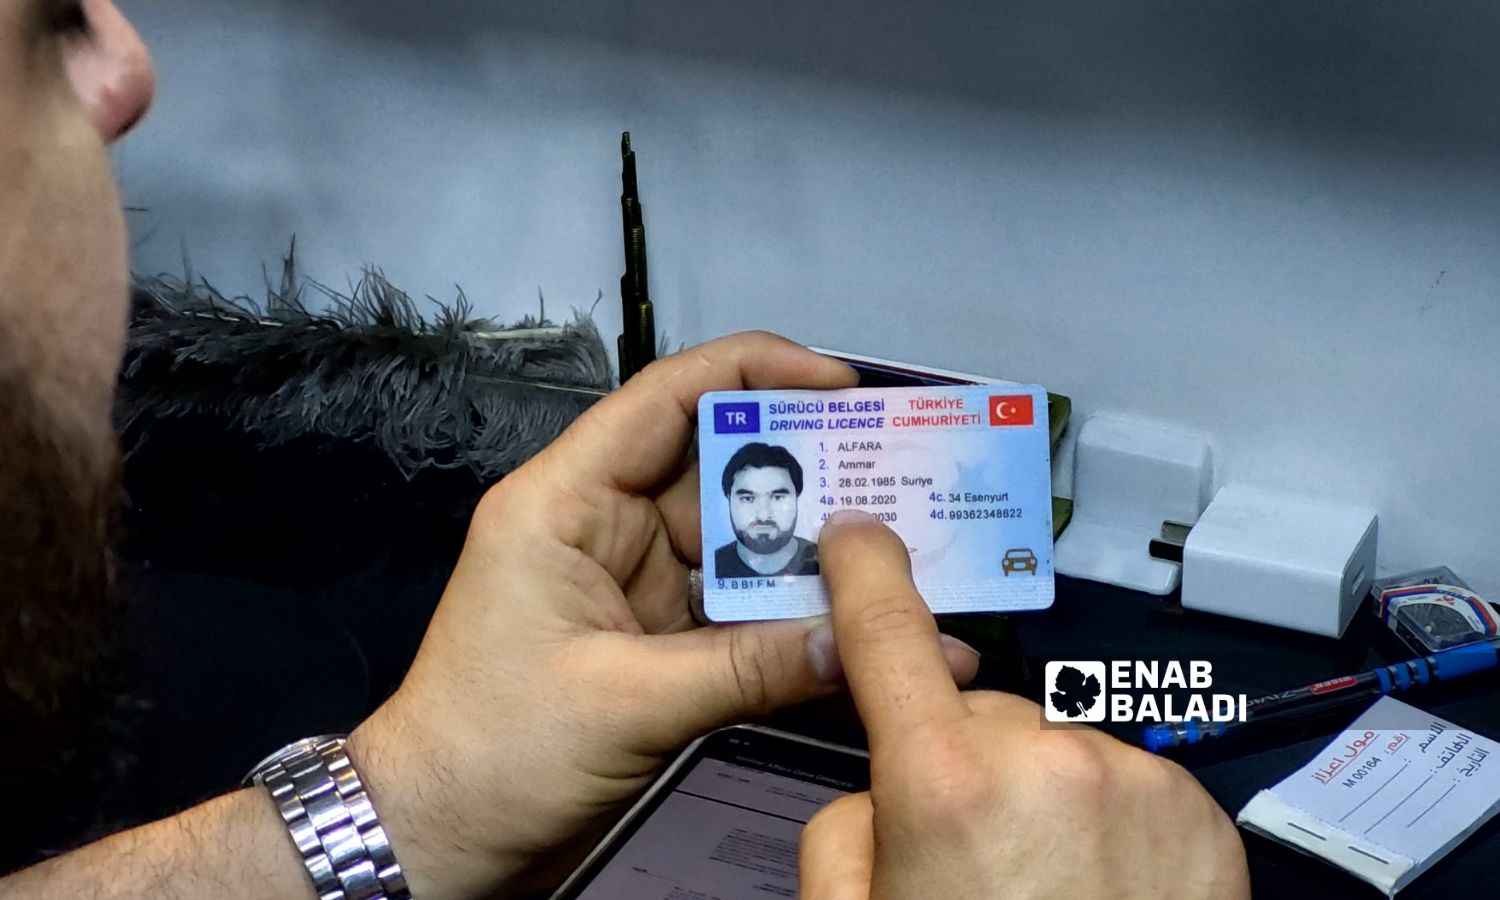 A Turkish driving license for a Syrian youth deported from Turkey - May 17, 2023 (Enab Baladi/Dayan Junpaz)